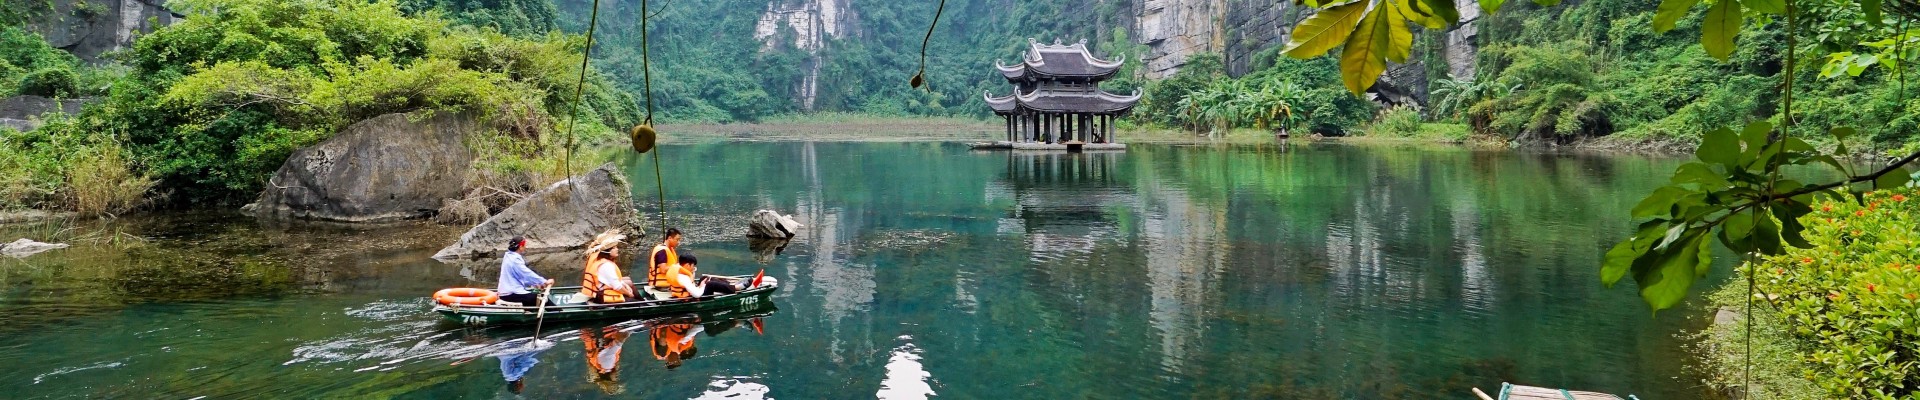 Ninh Binh Vietnam: Local Travel Guide & Authentic Experience